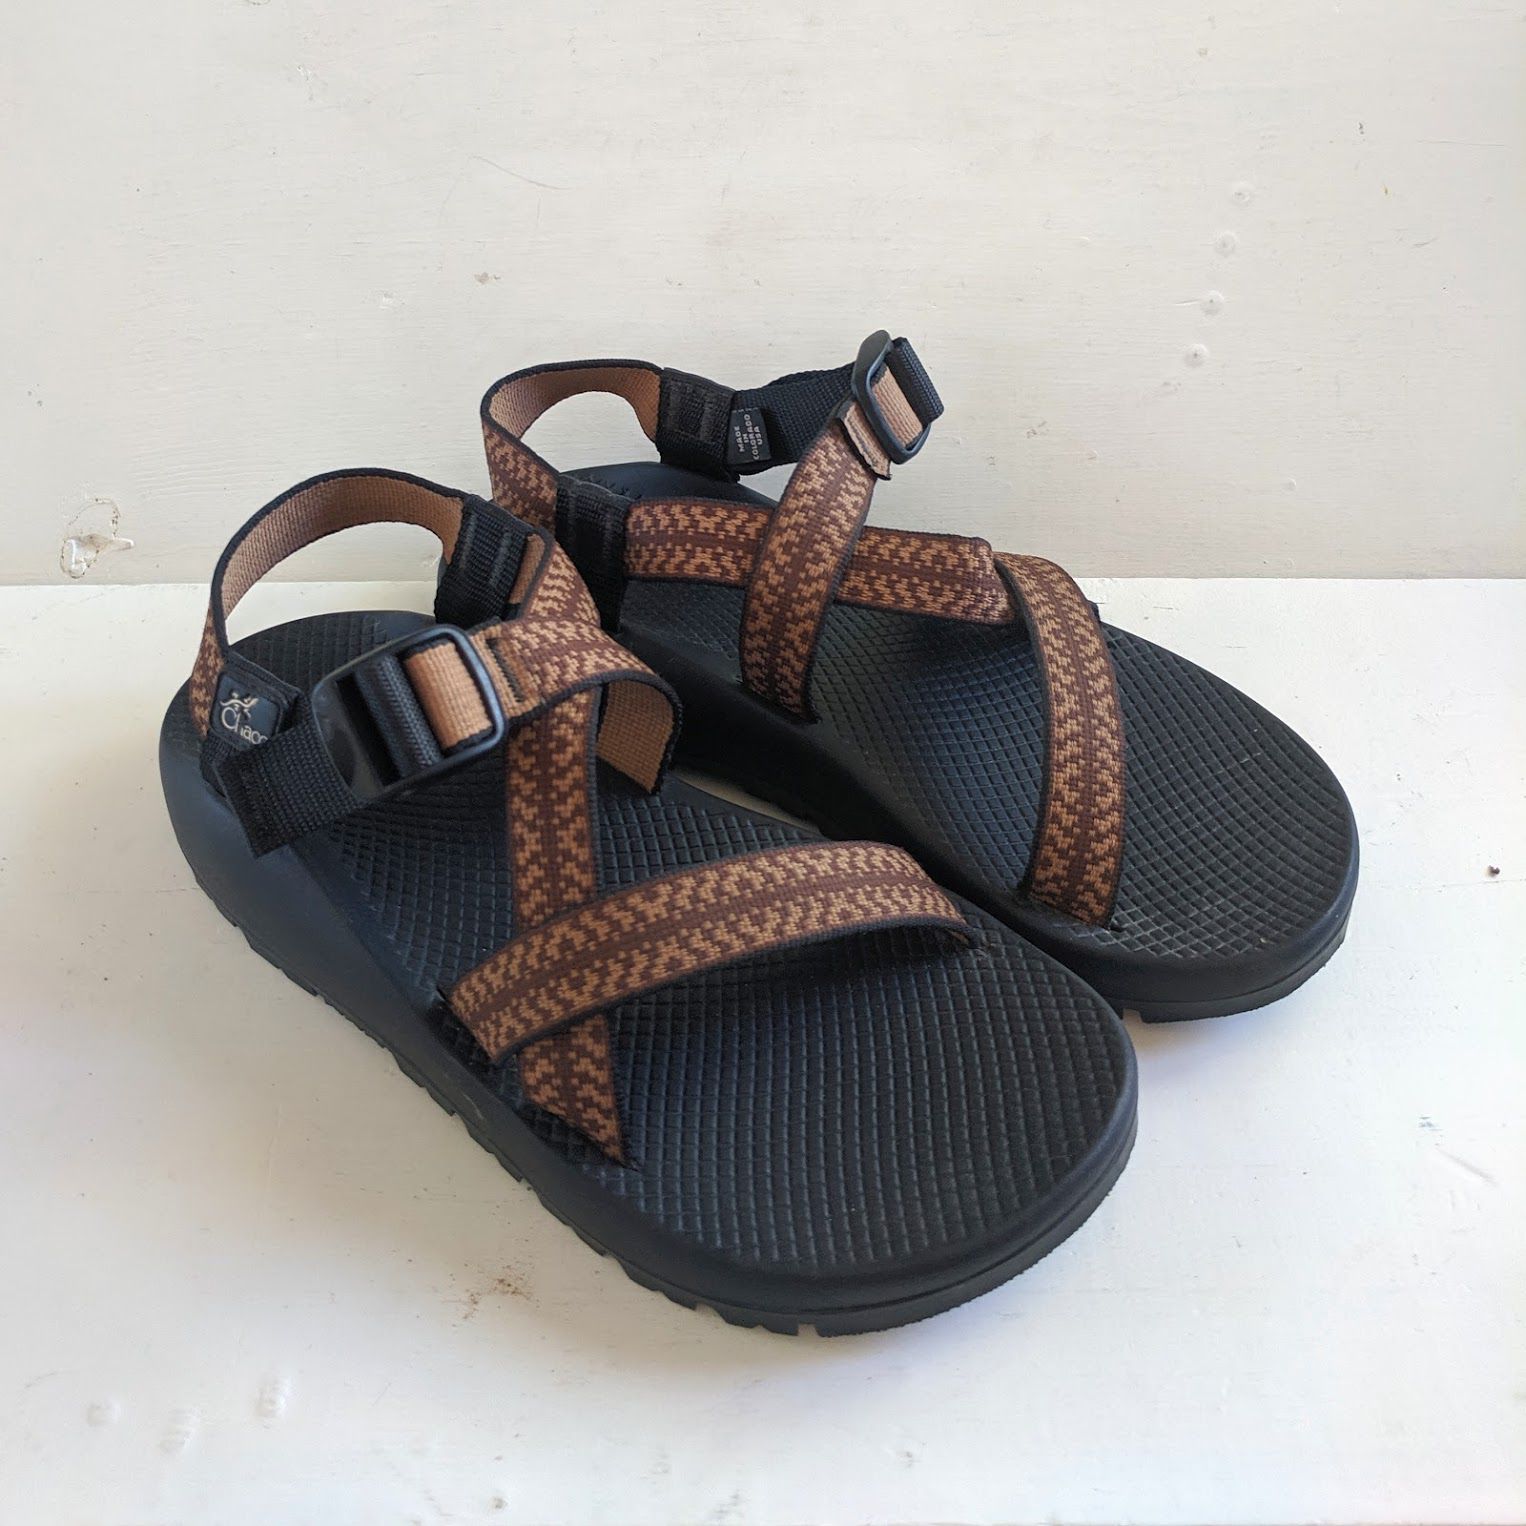 Chaco Z/1 Sandals (Like New) Men's 10